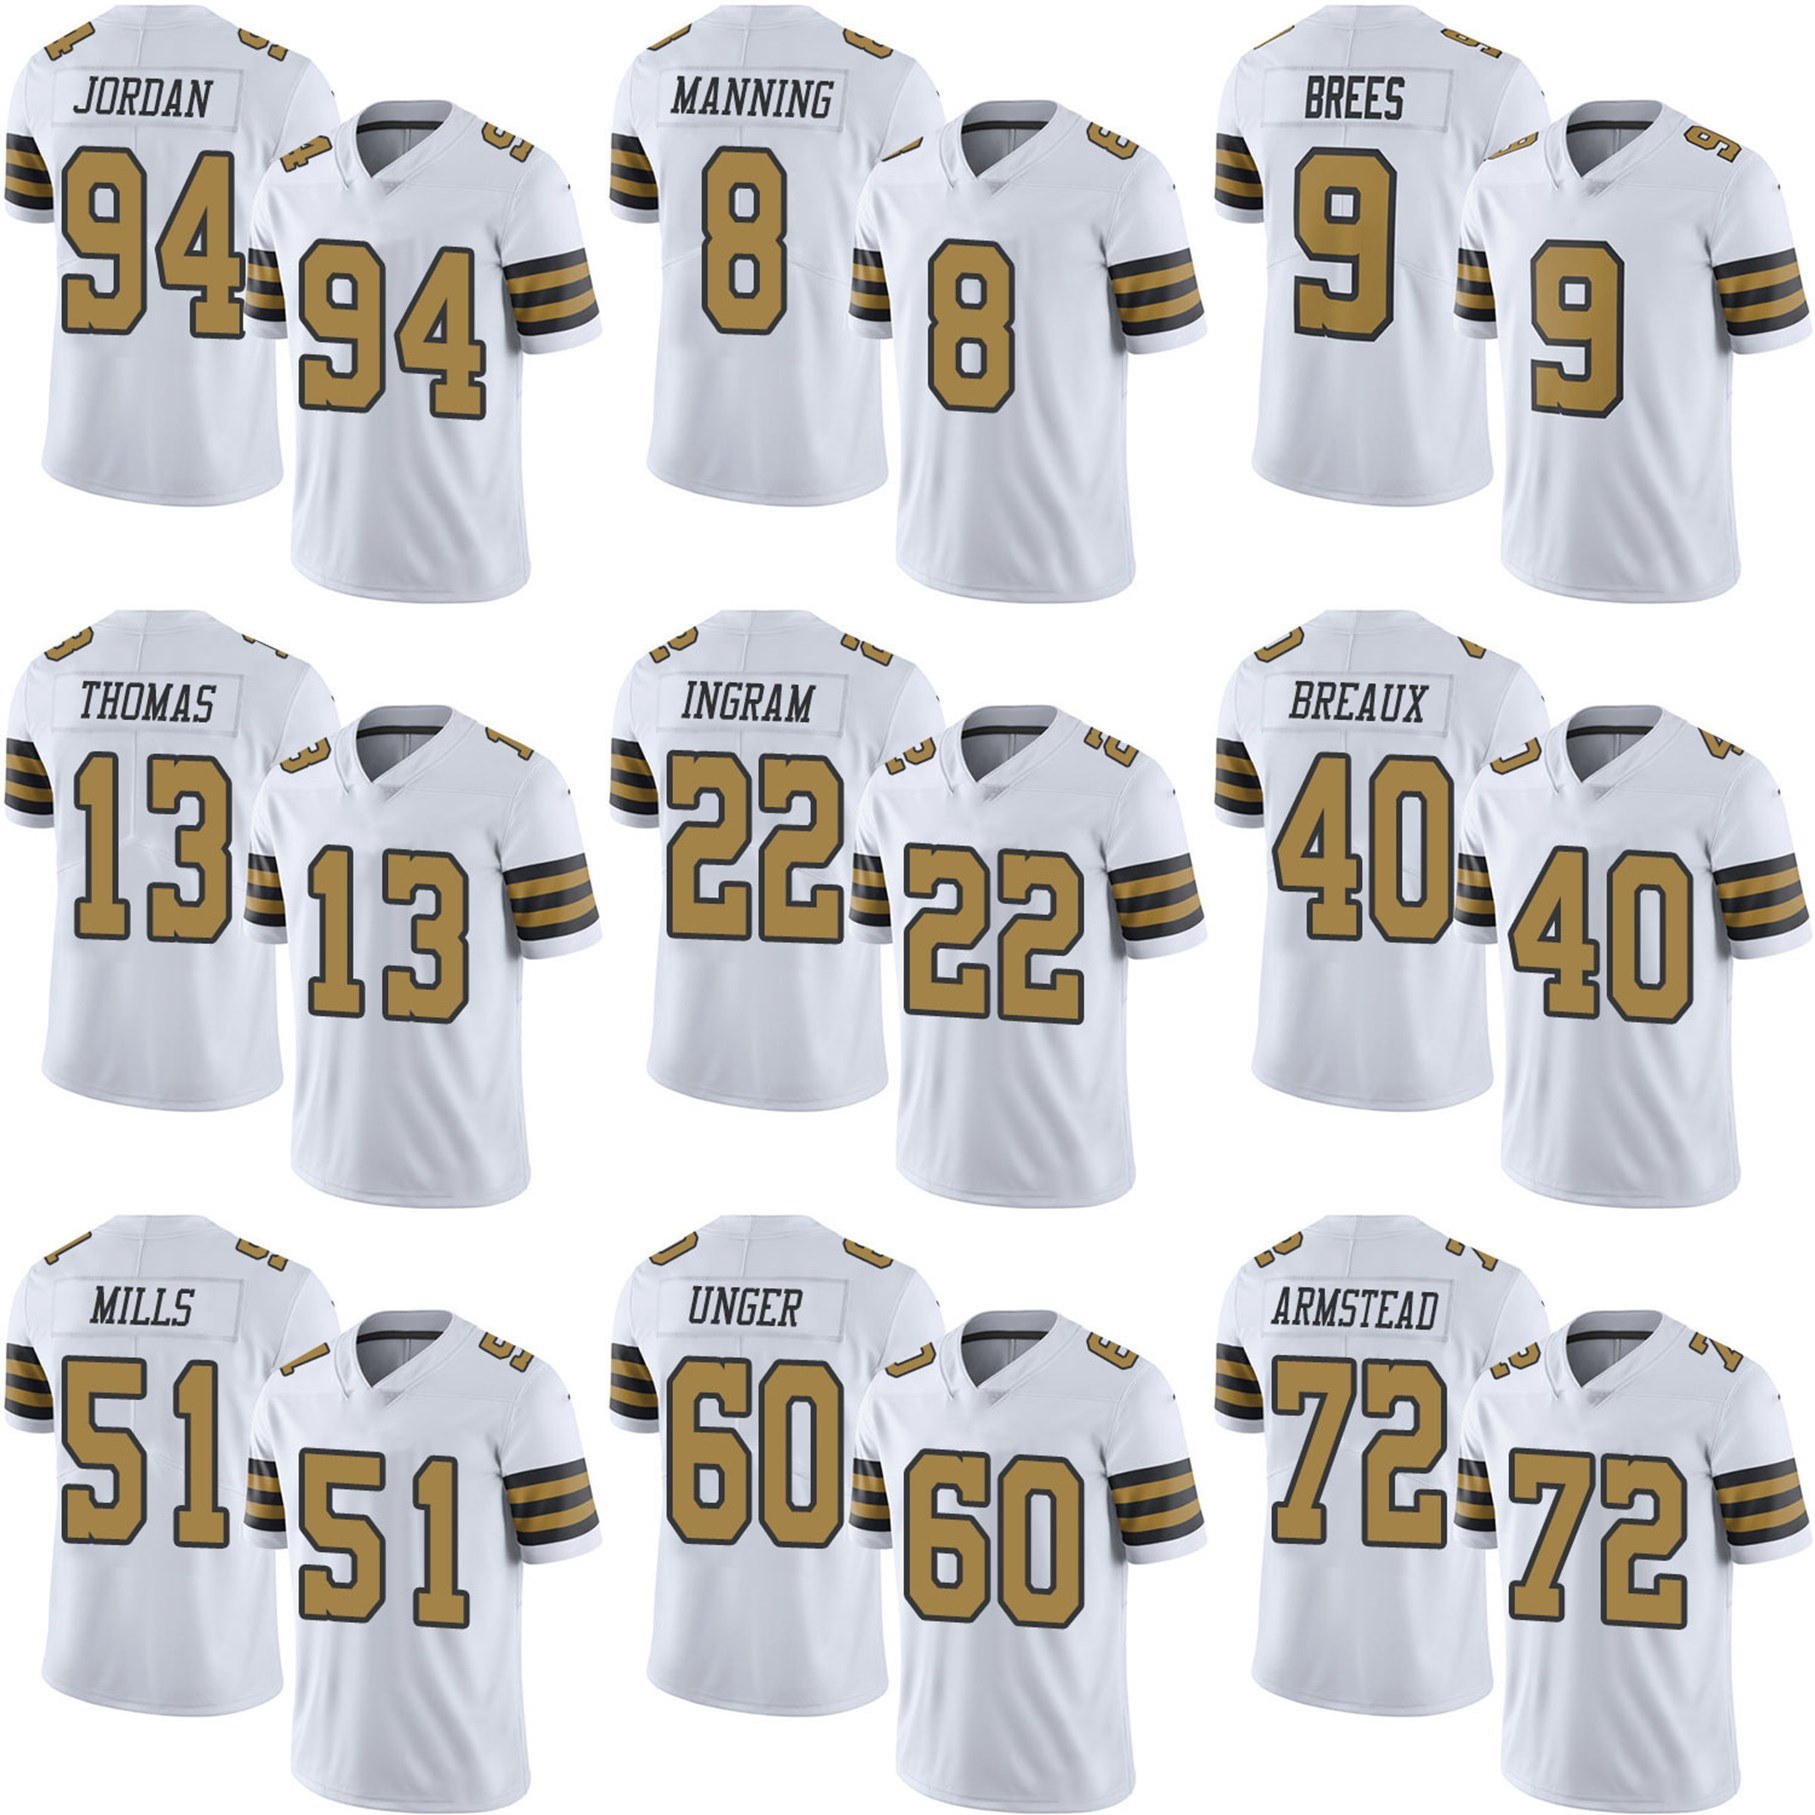 New Orleans Archie Manning Drew Brees Michael Thomas Football Jerseys